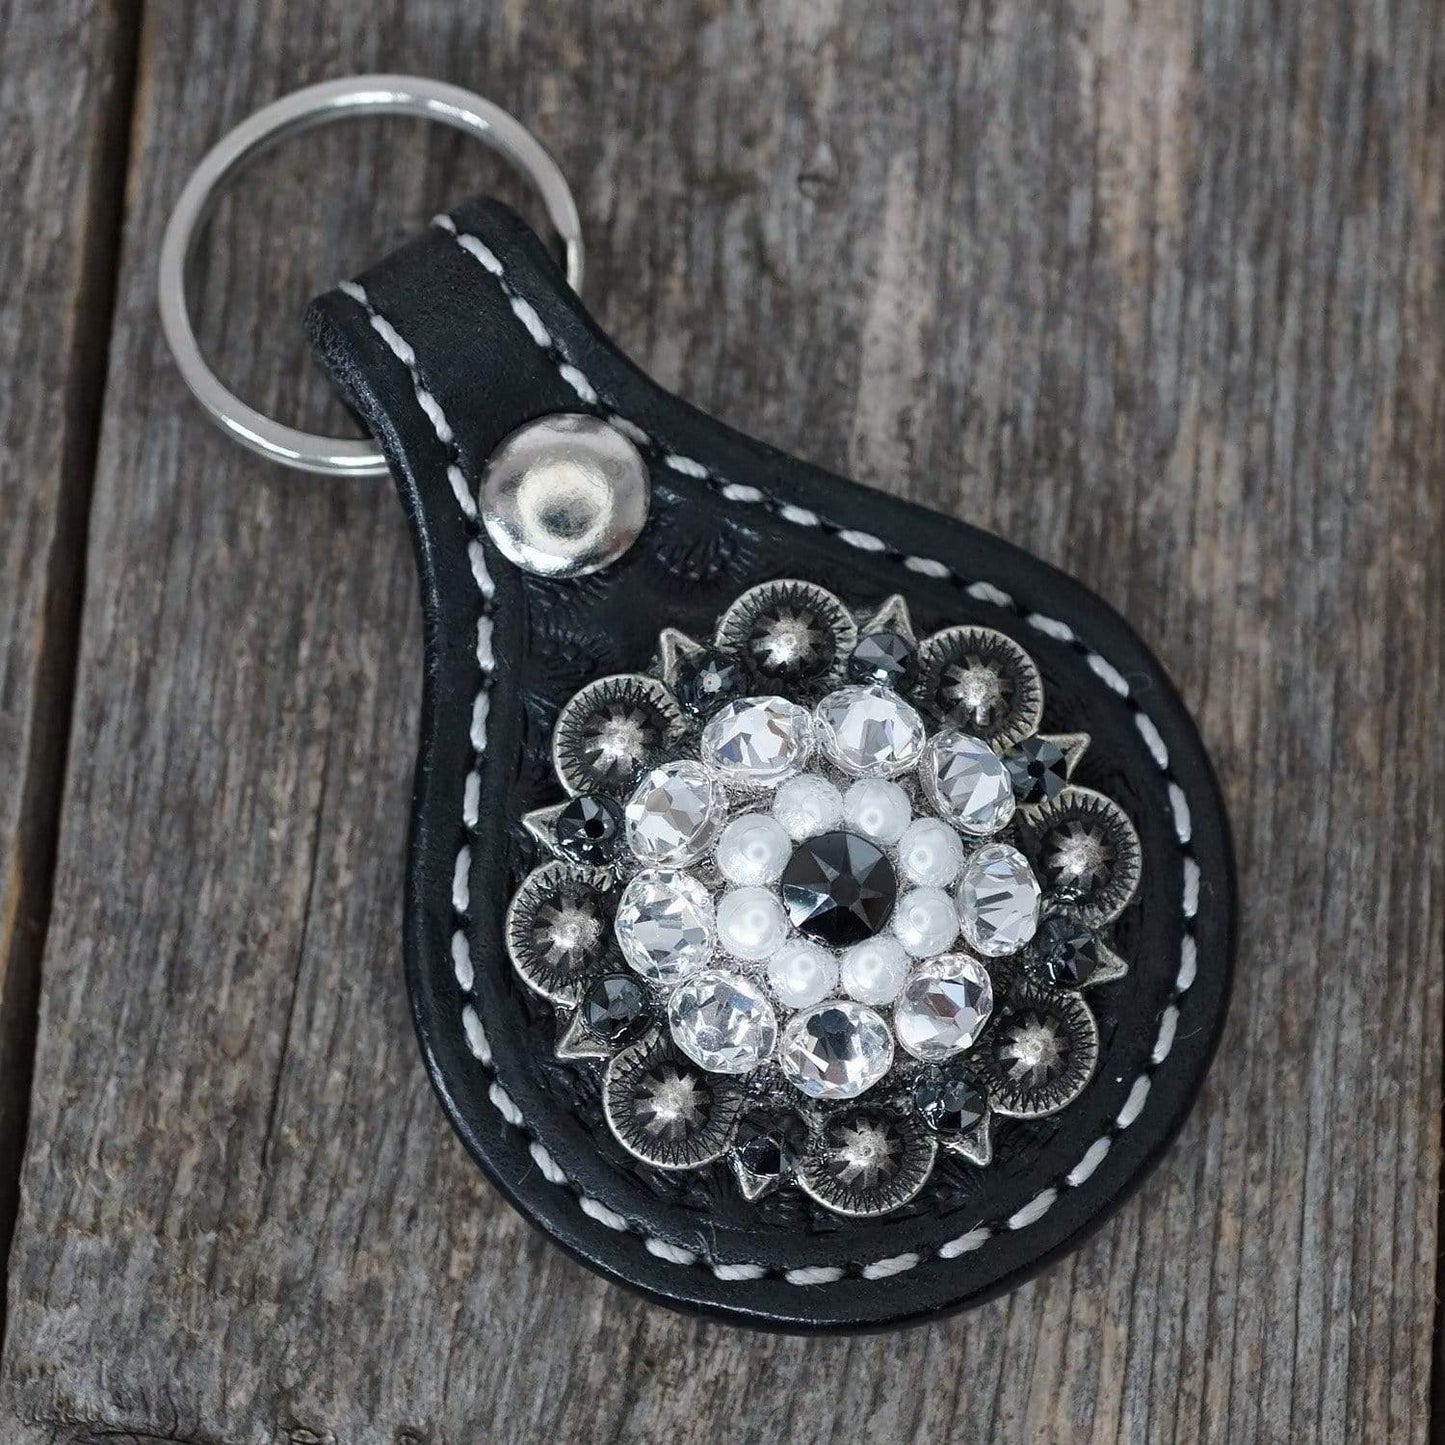 Key Chains Round Black Key Chain with Jet and Pearl European Crystal Concho KBJT-1